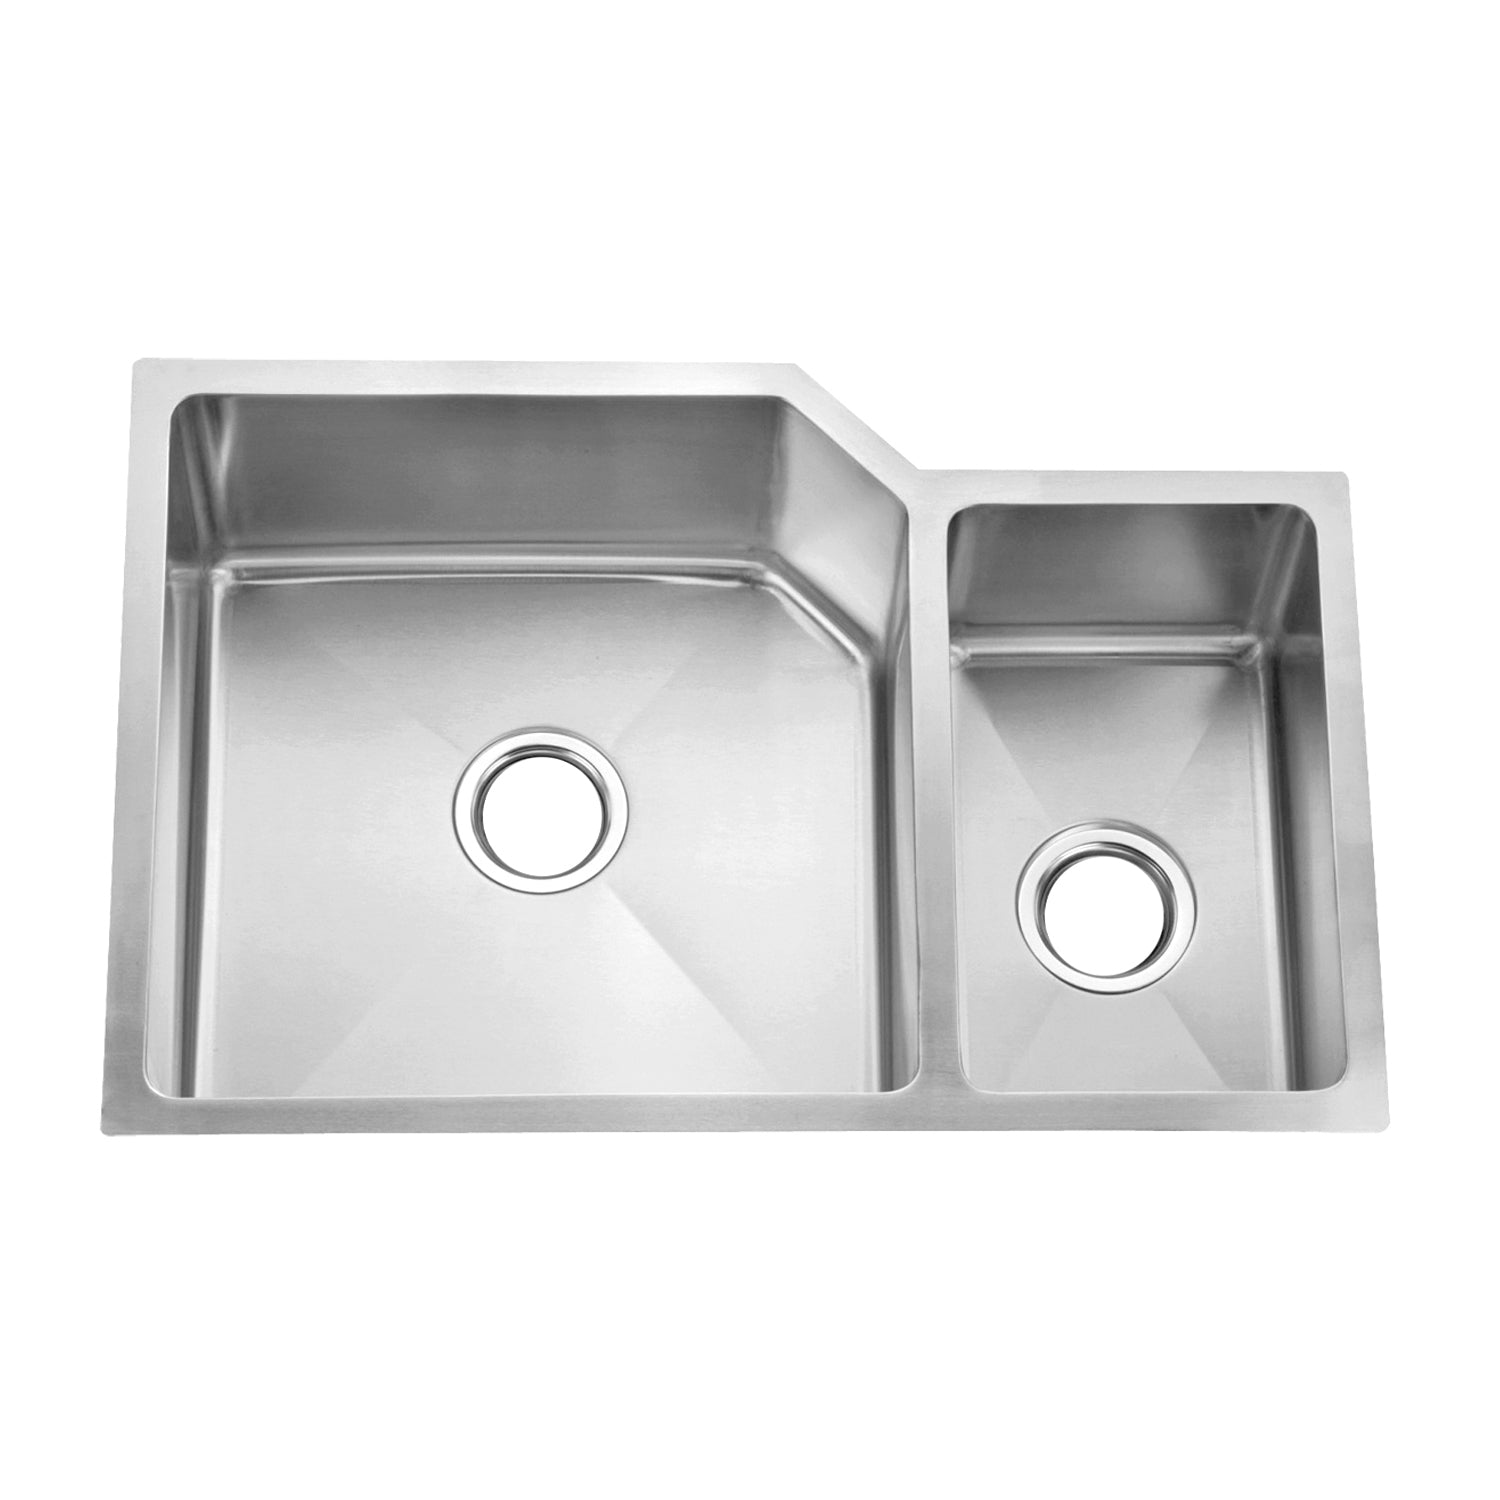 DAX Handmade 70/30 Double Bowl Undermount Kitchen Sink, 16 Gauge Stainless Steel, Brushed Finish, 30 x 18 x 9 Inches (DAX-3020B)